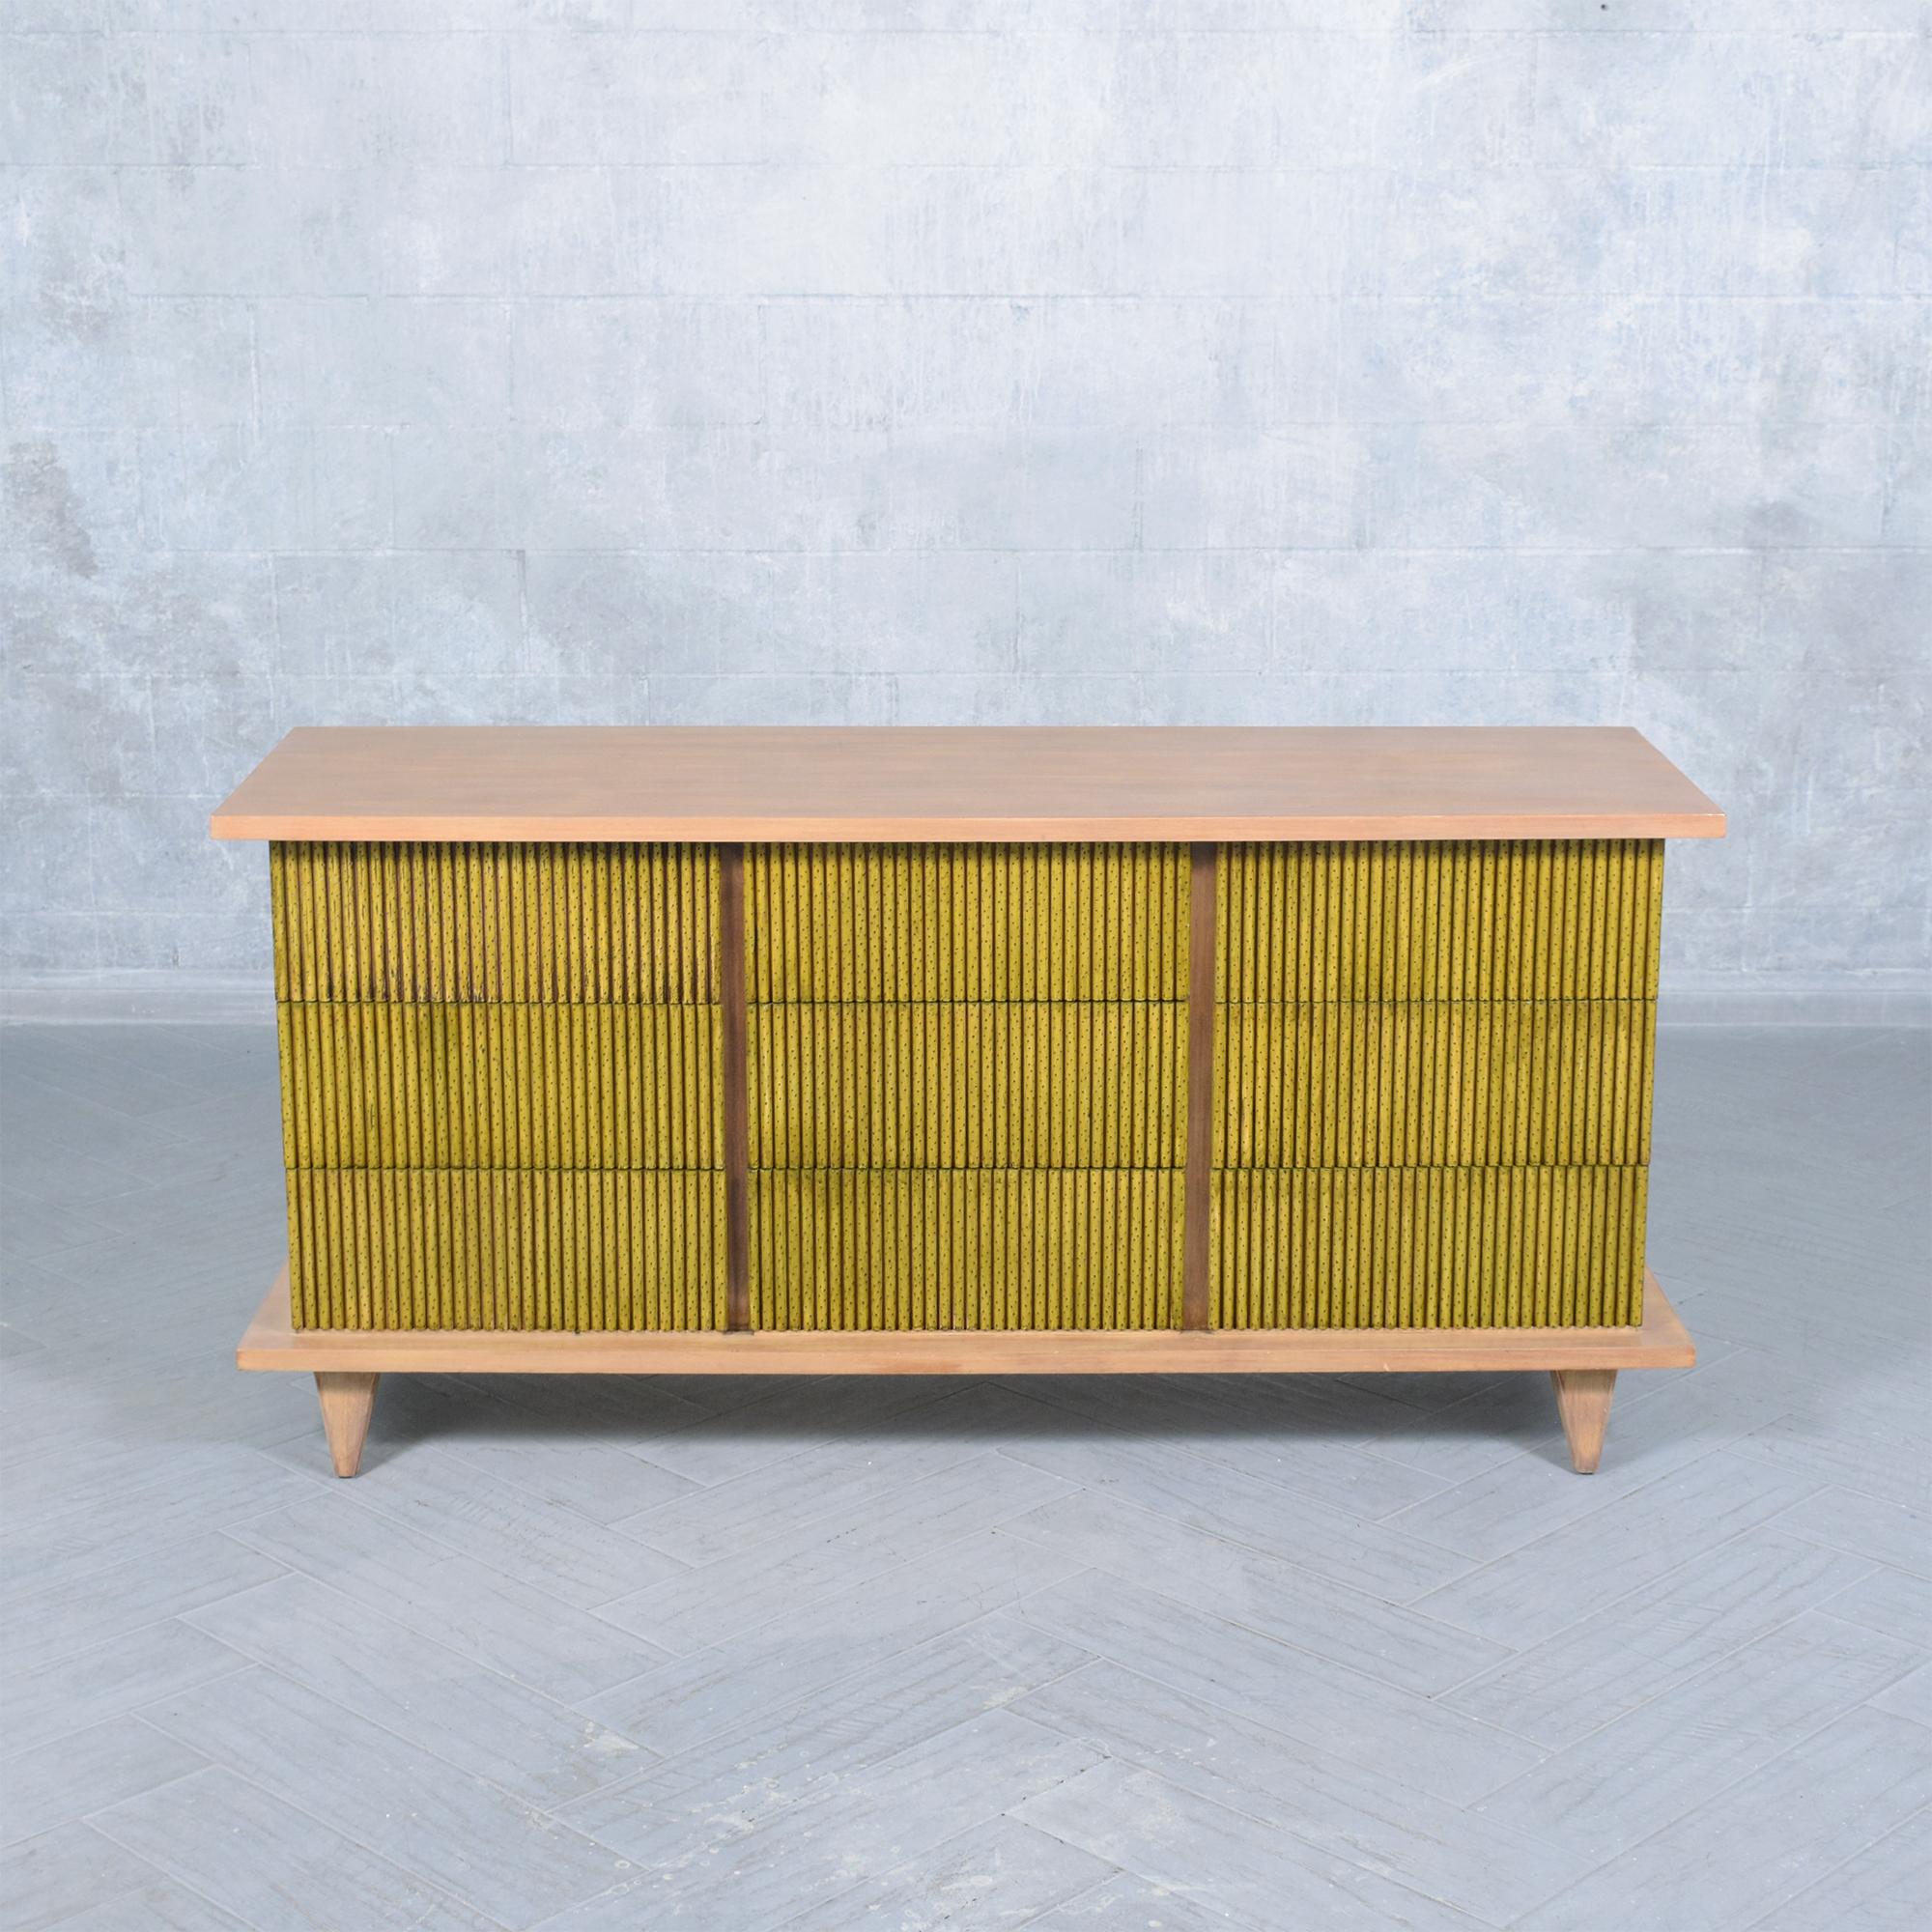 Experience the charm of our meticulously restored Mid-Century Organic Modern Chest of Drawers, crafted from premium walnut wood. This 1960s gem, rejuvenated by our expert artisans, is a testament to mid-century aesthetics. Its captivating mix of